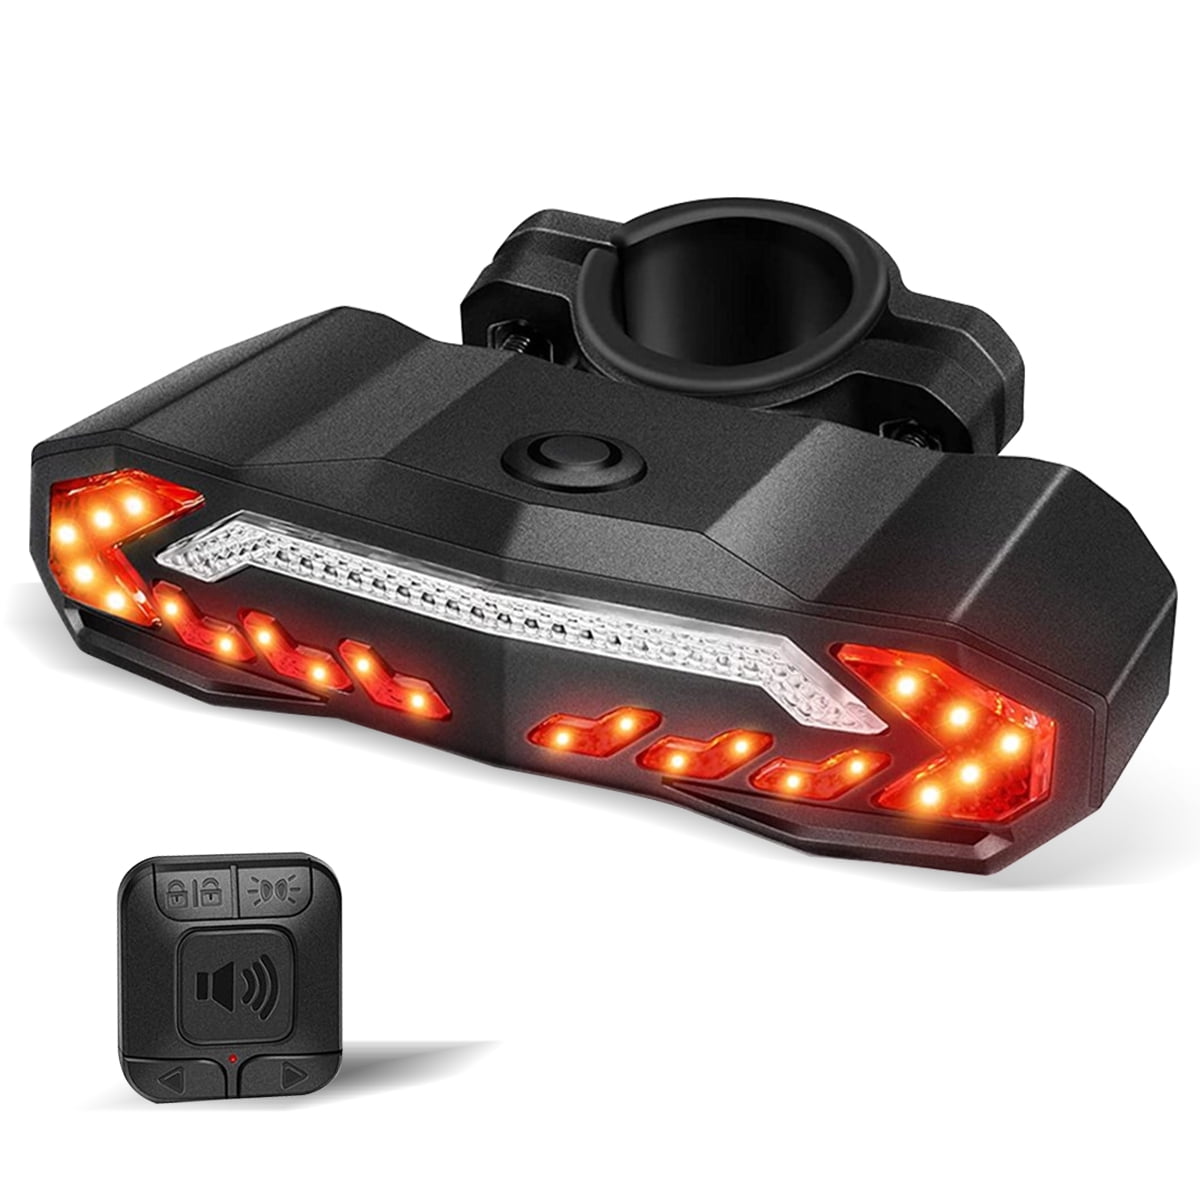 Iets Muf pastel Smart Bike Tail Light with Turn Signals, Bike Horn Bike Alarm, Automatic  Brake Light with Remote, USB Rechargeable Bike Rear Light, Safety Warning Cycling  Light Fits on Any Road Bicycle - Walmart.com